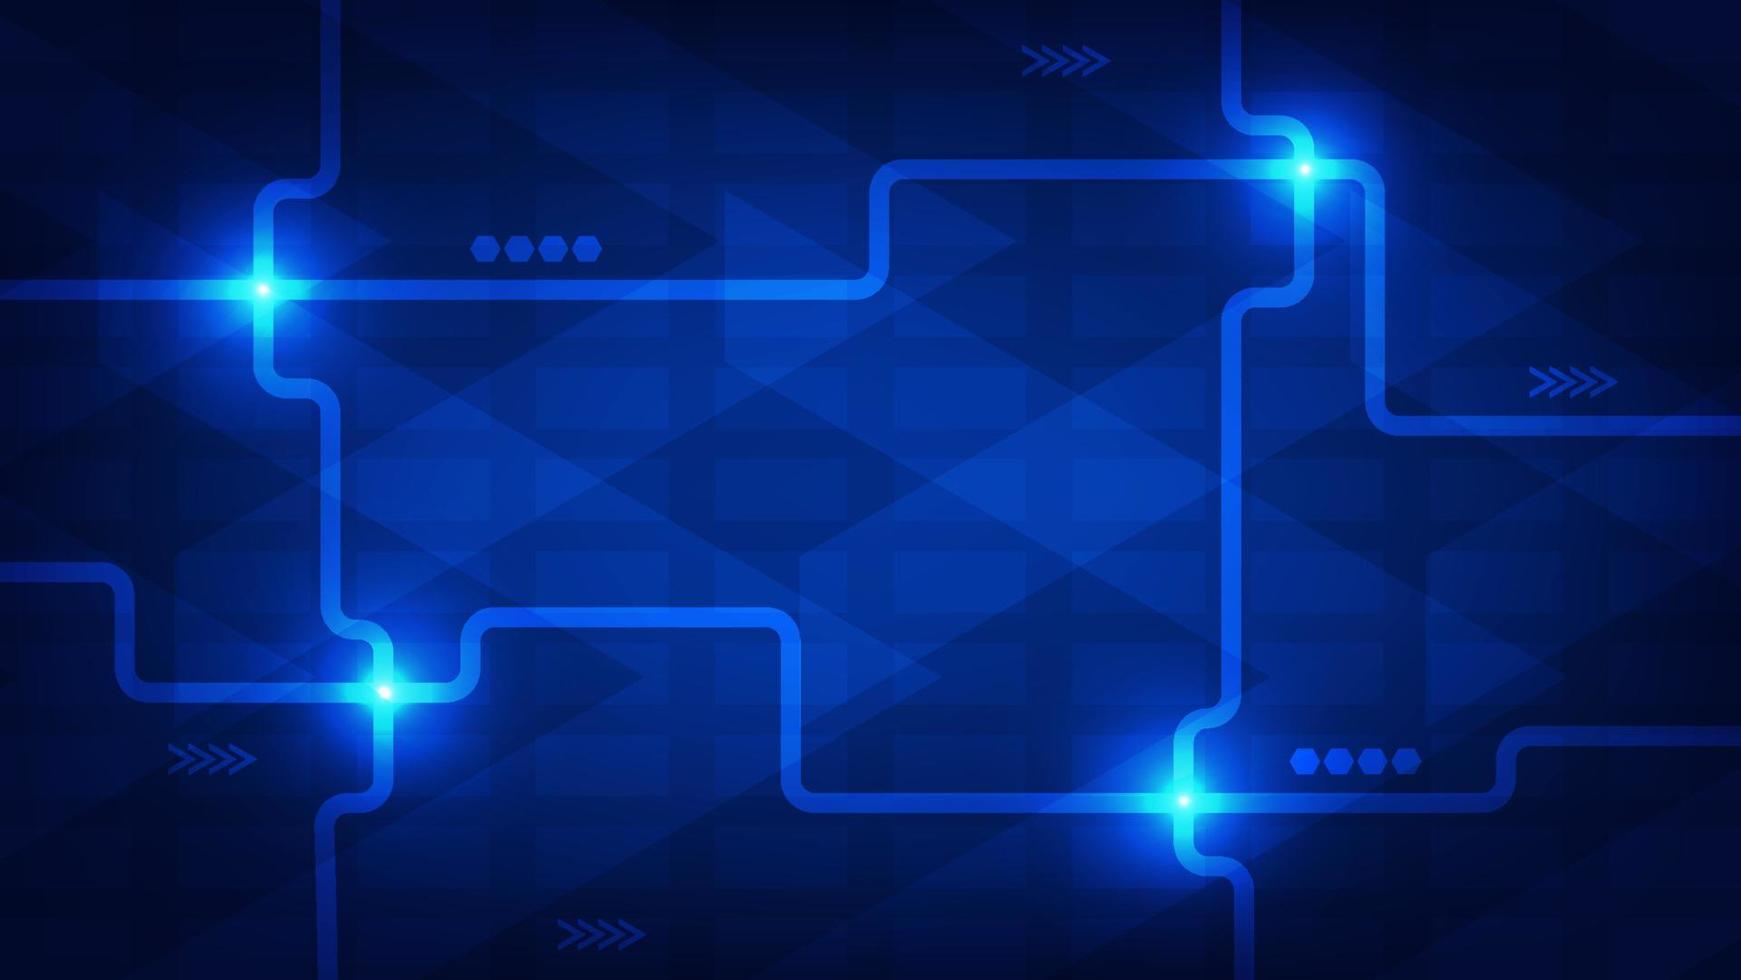 Hi tech digital technology and futuristic communication background concept. electric connecting lines as network with blue lighting on dark space vector